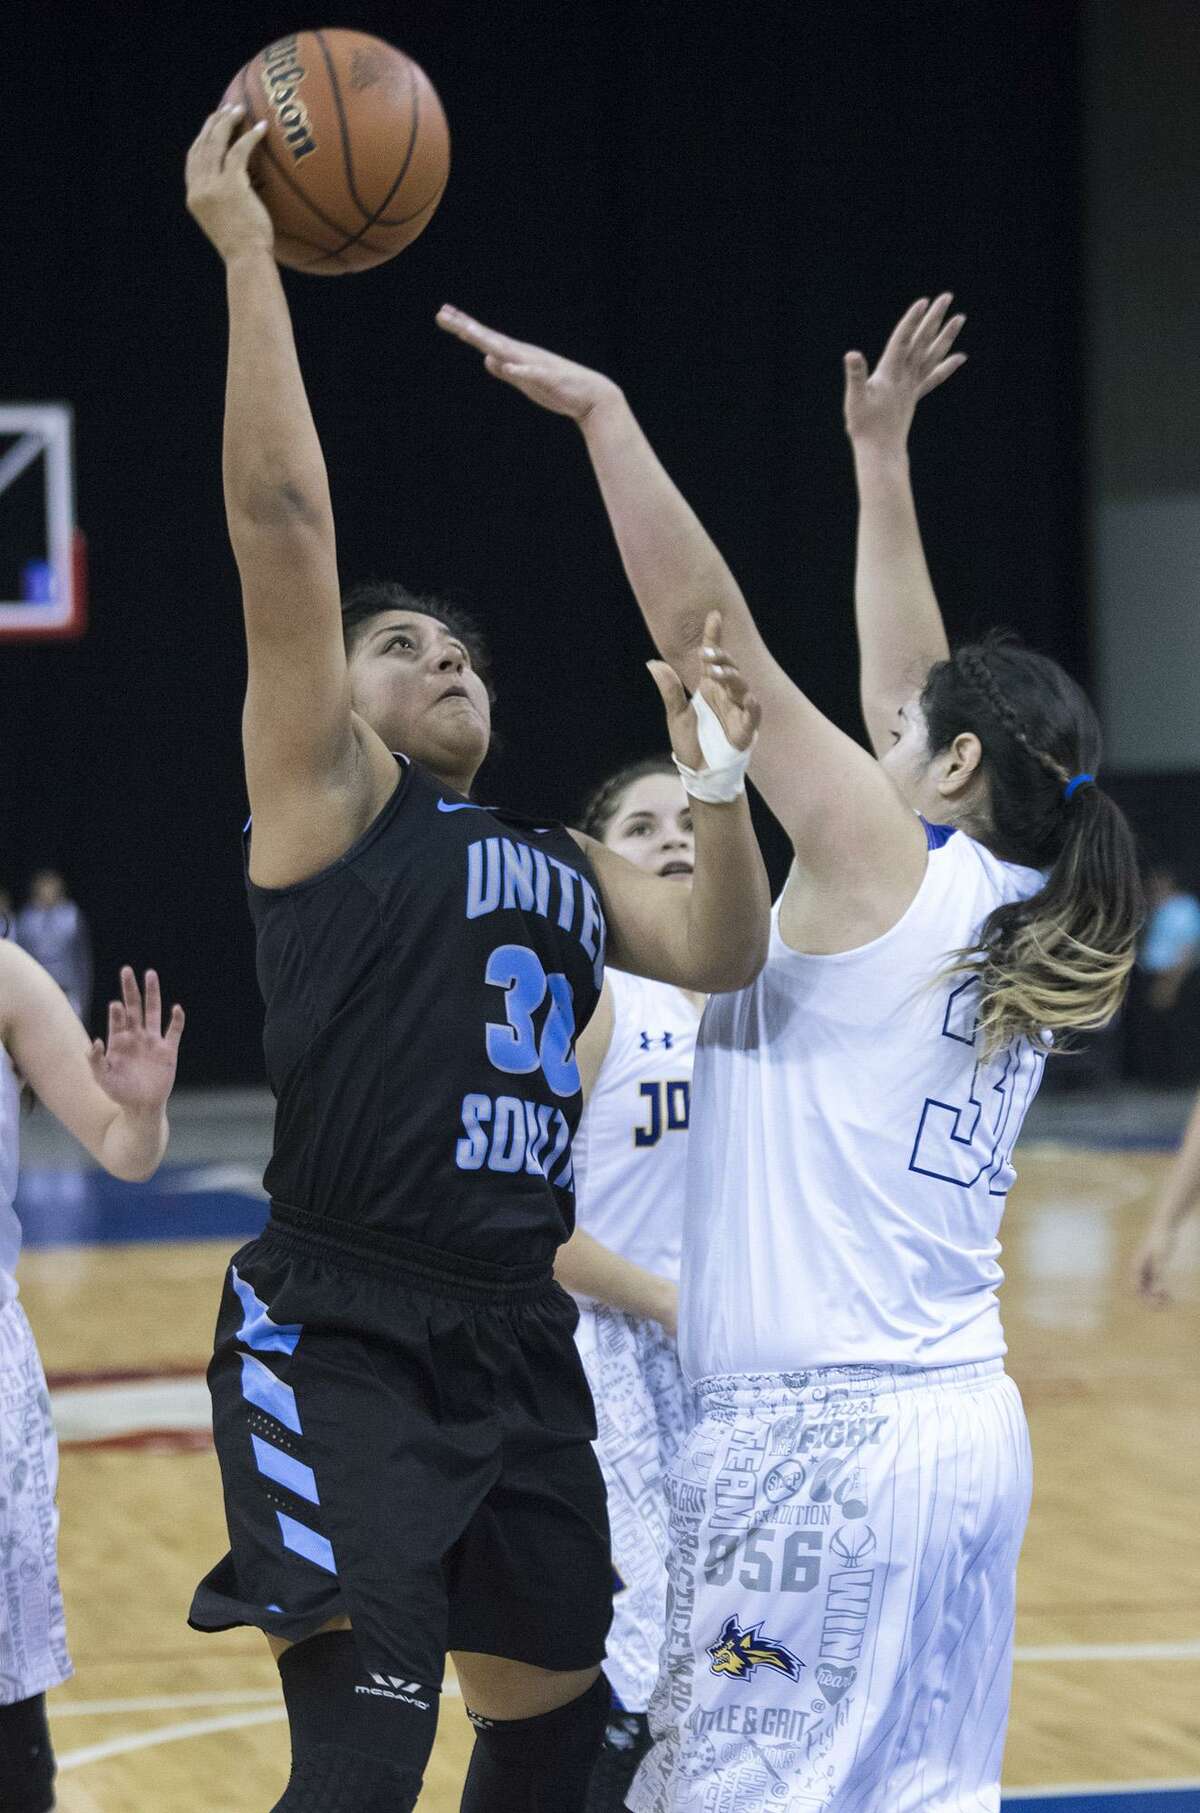 Evelyn Cruz and United South won 83-36 over LBJ Friday behind Cruz’s 20 points.